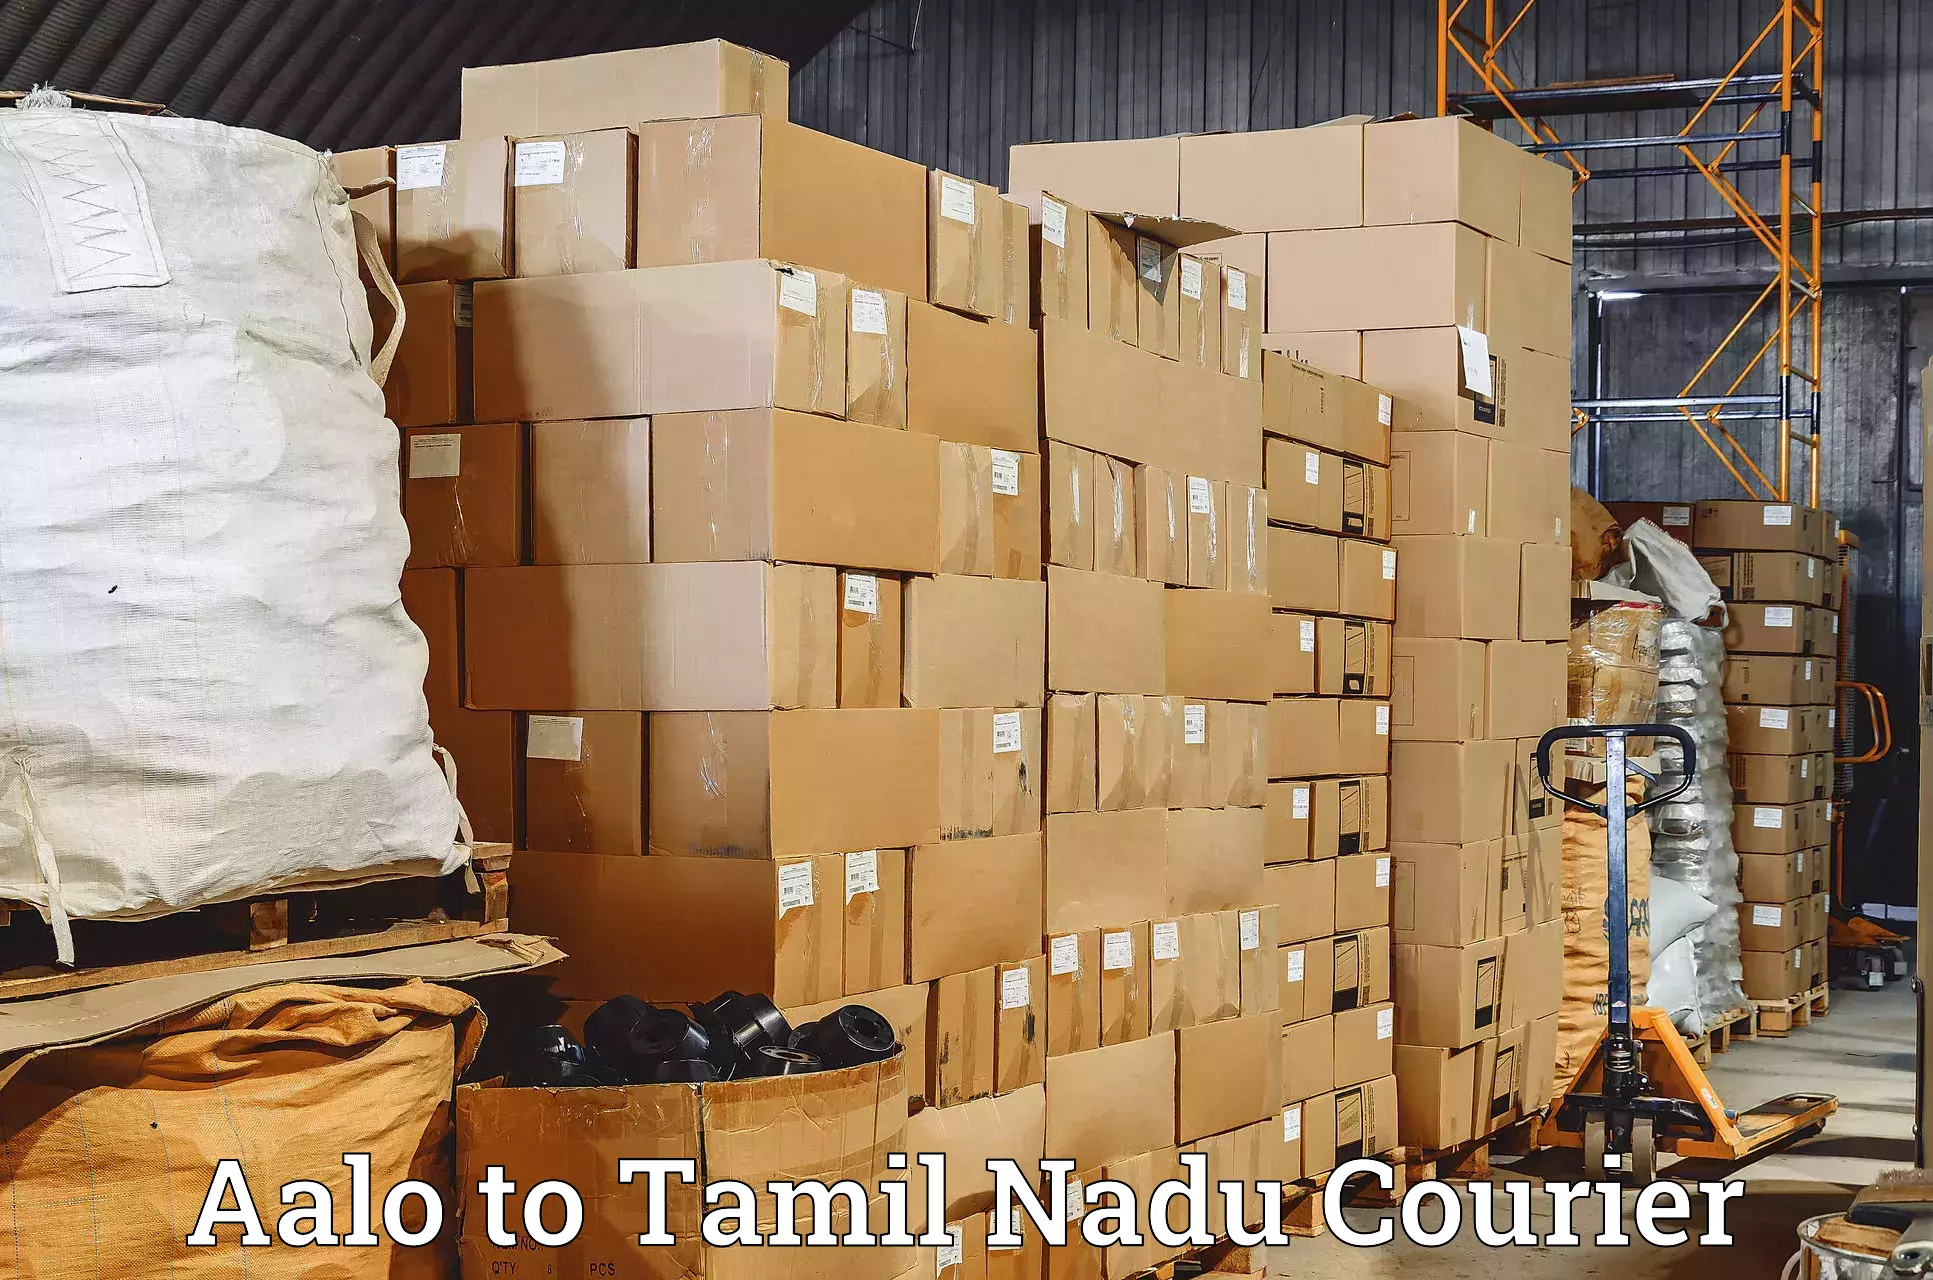 Reliable courier service Aalo to Chennai Port